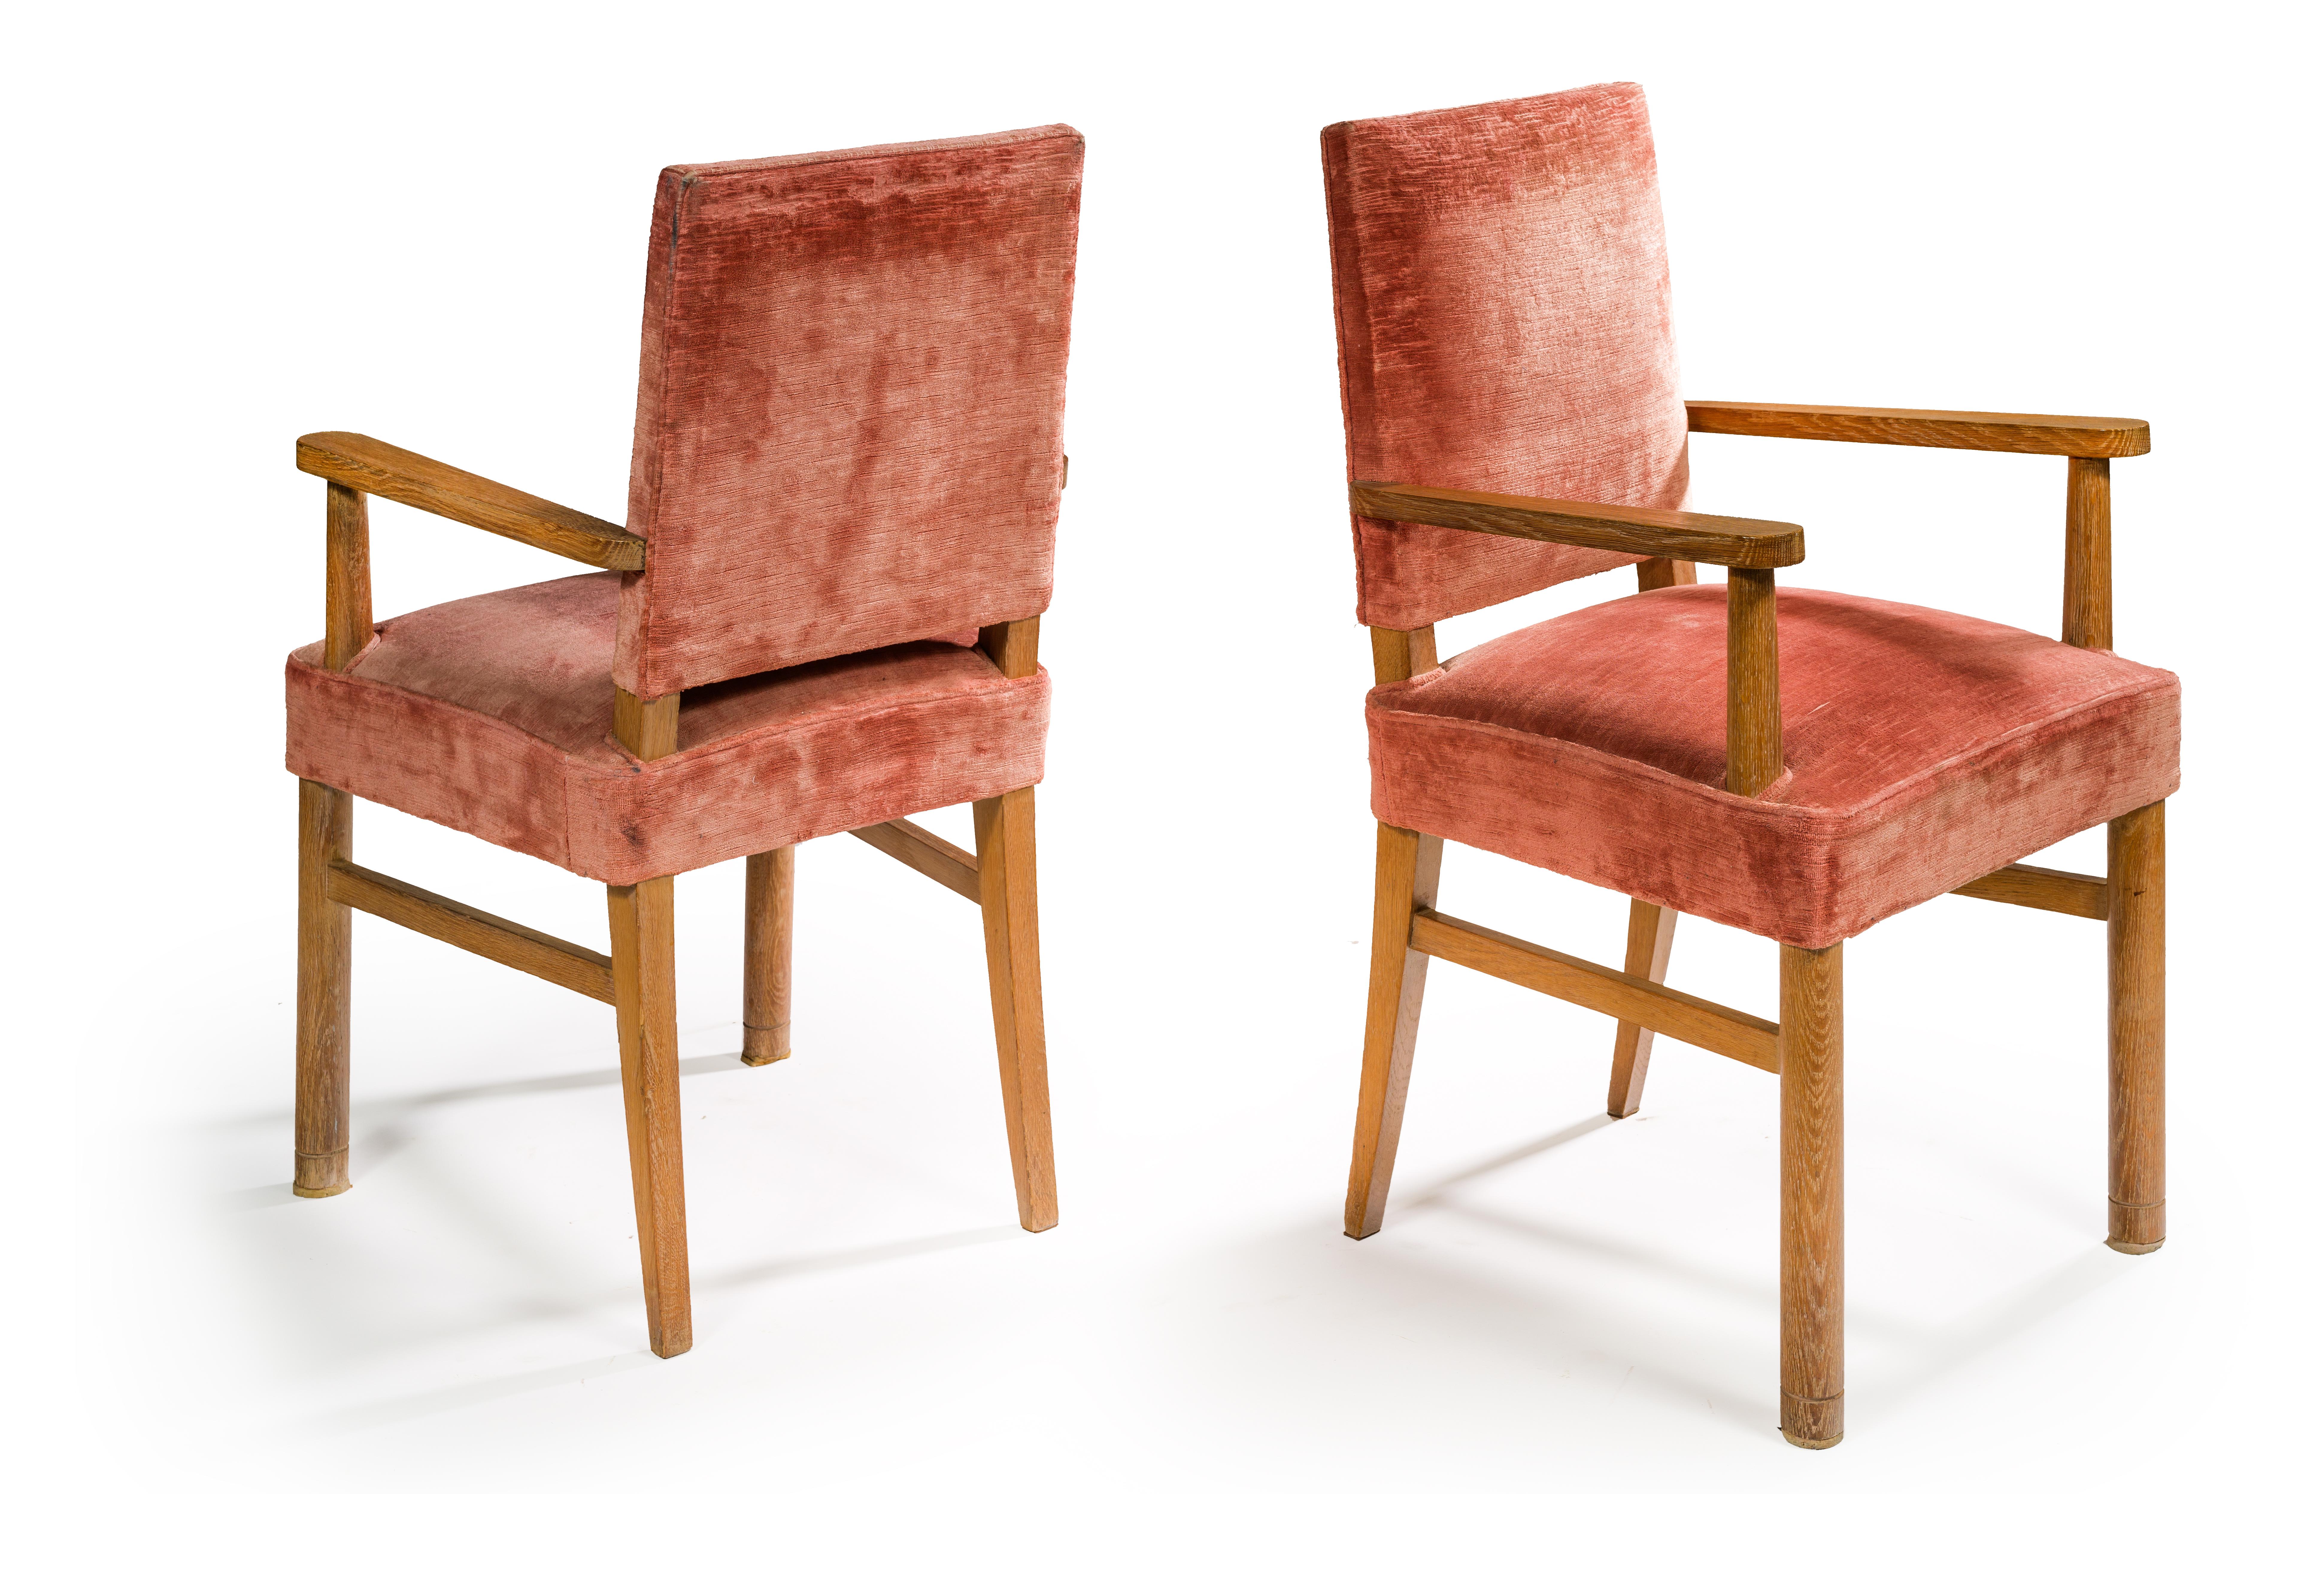 Jacques Adnet, attributed, four armchairs, 1940-1950
Oak and pink vintage velvet.